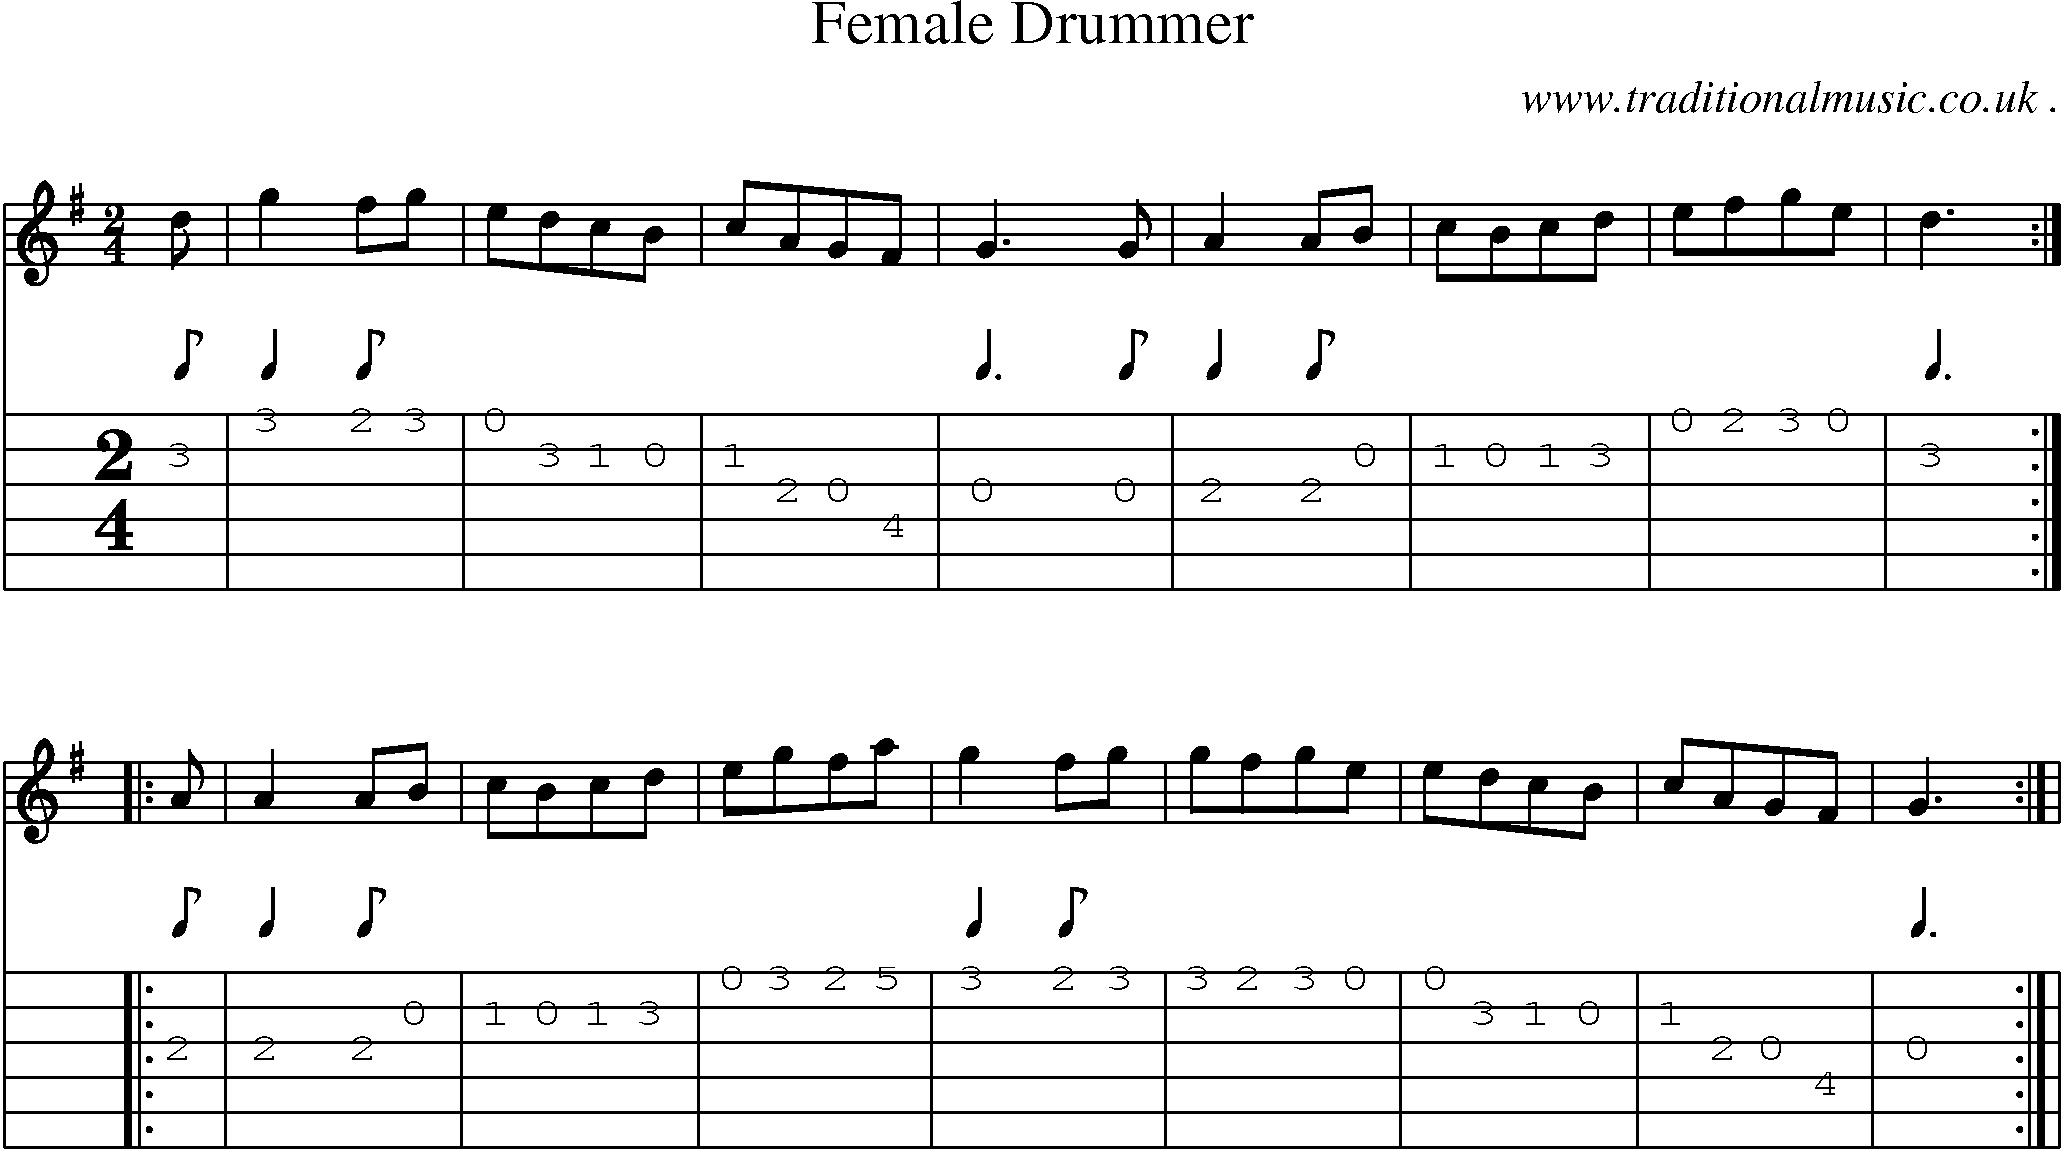 Sheet-Music and Guitar Tabs for Female Drummer